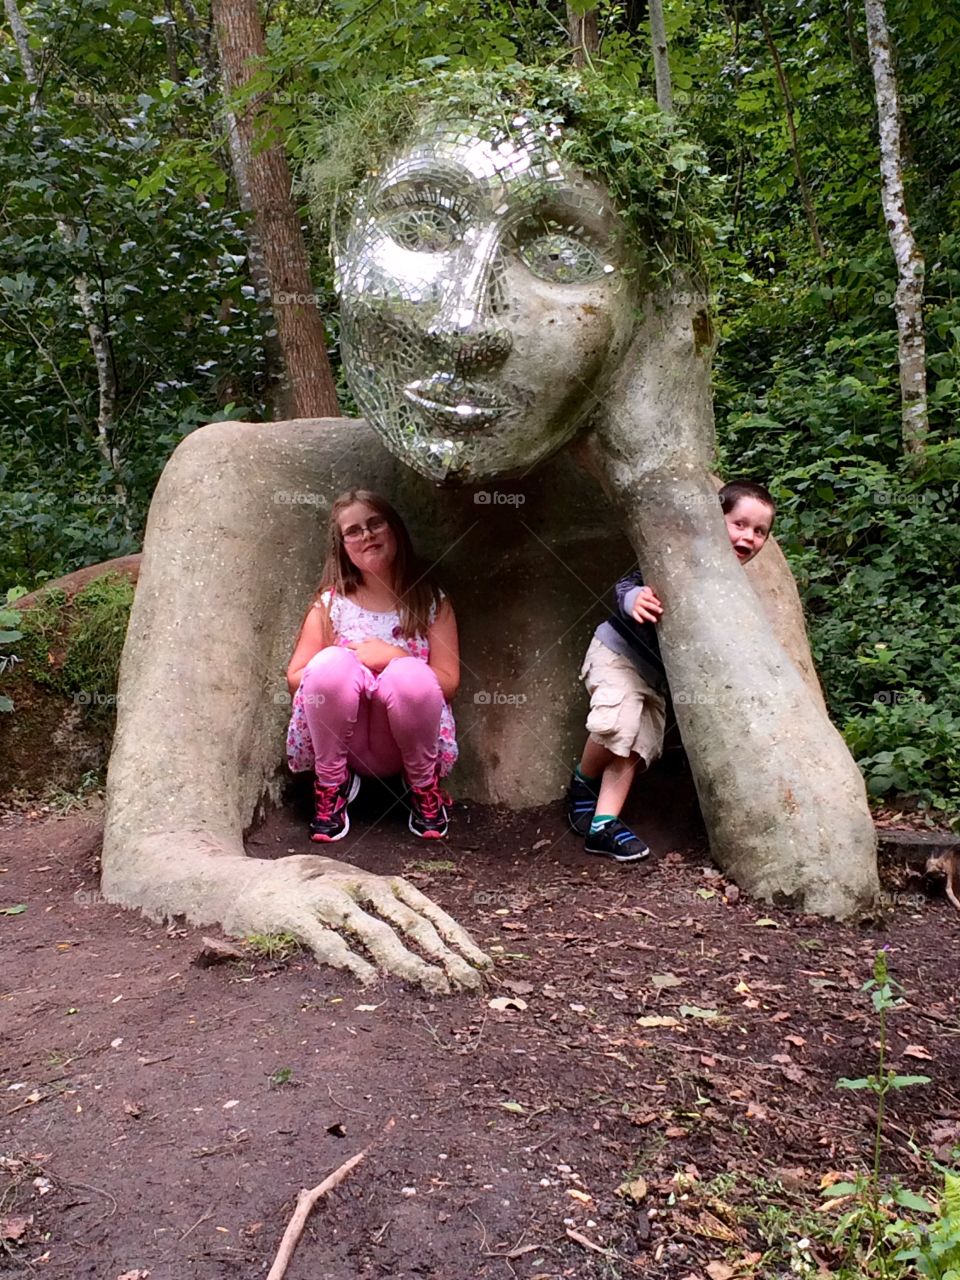 Kids having fun at the Eden Project. Has she/he got legs down there??